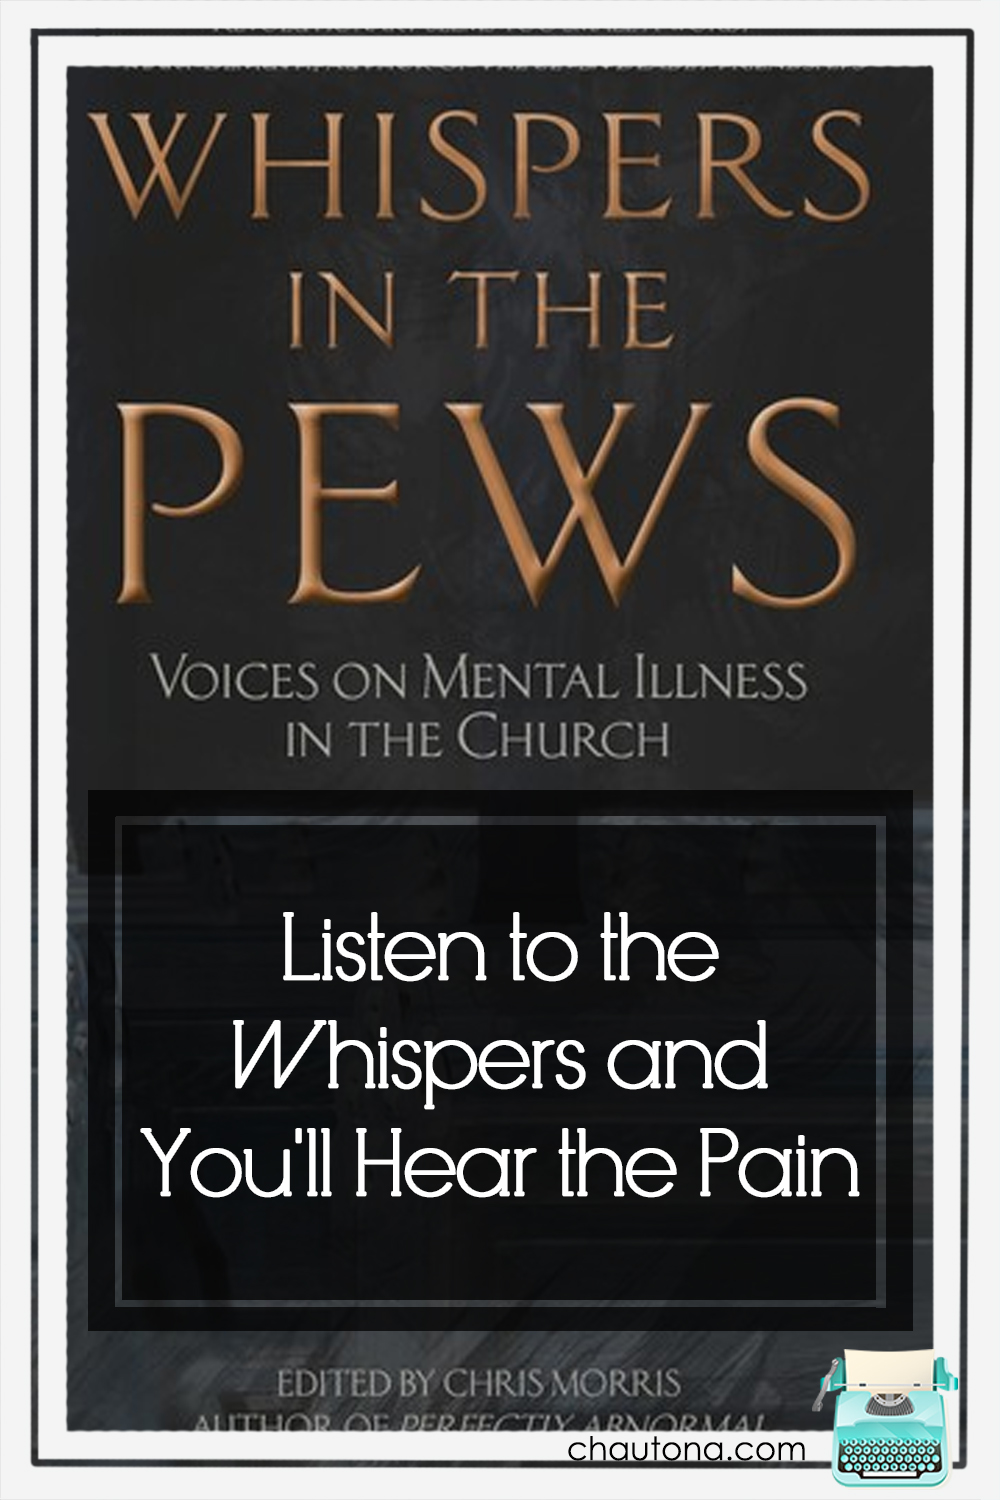 Whispers in the Pews (mental illness)